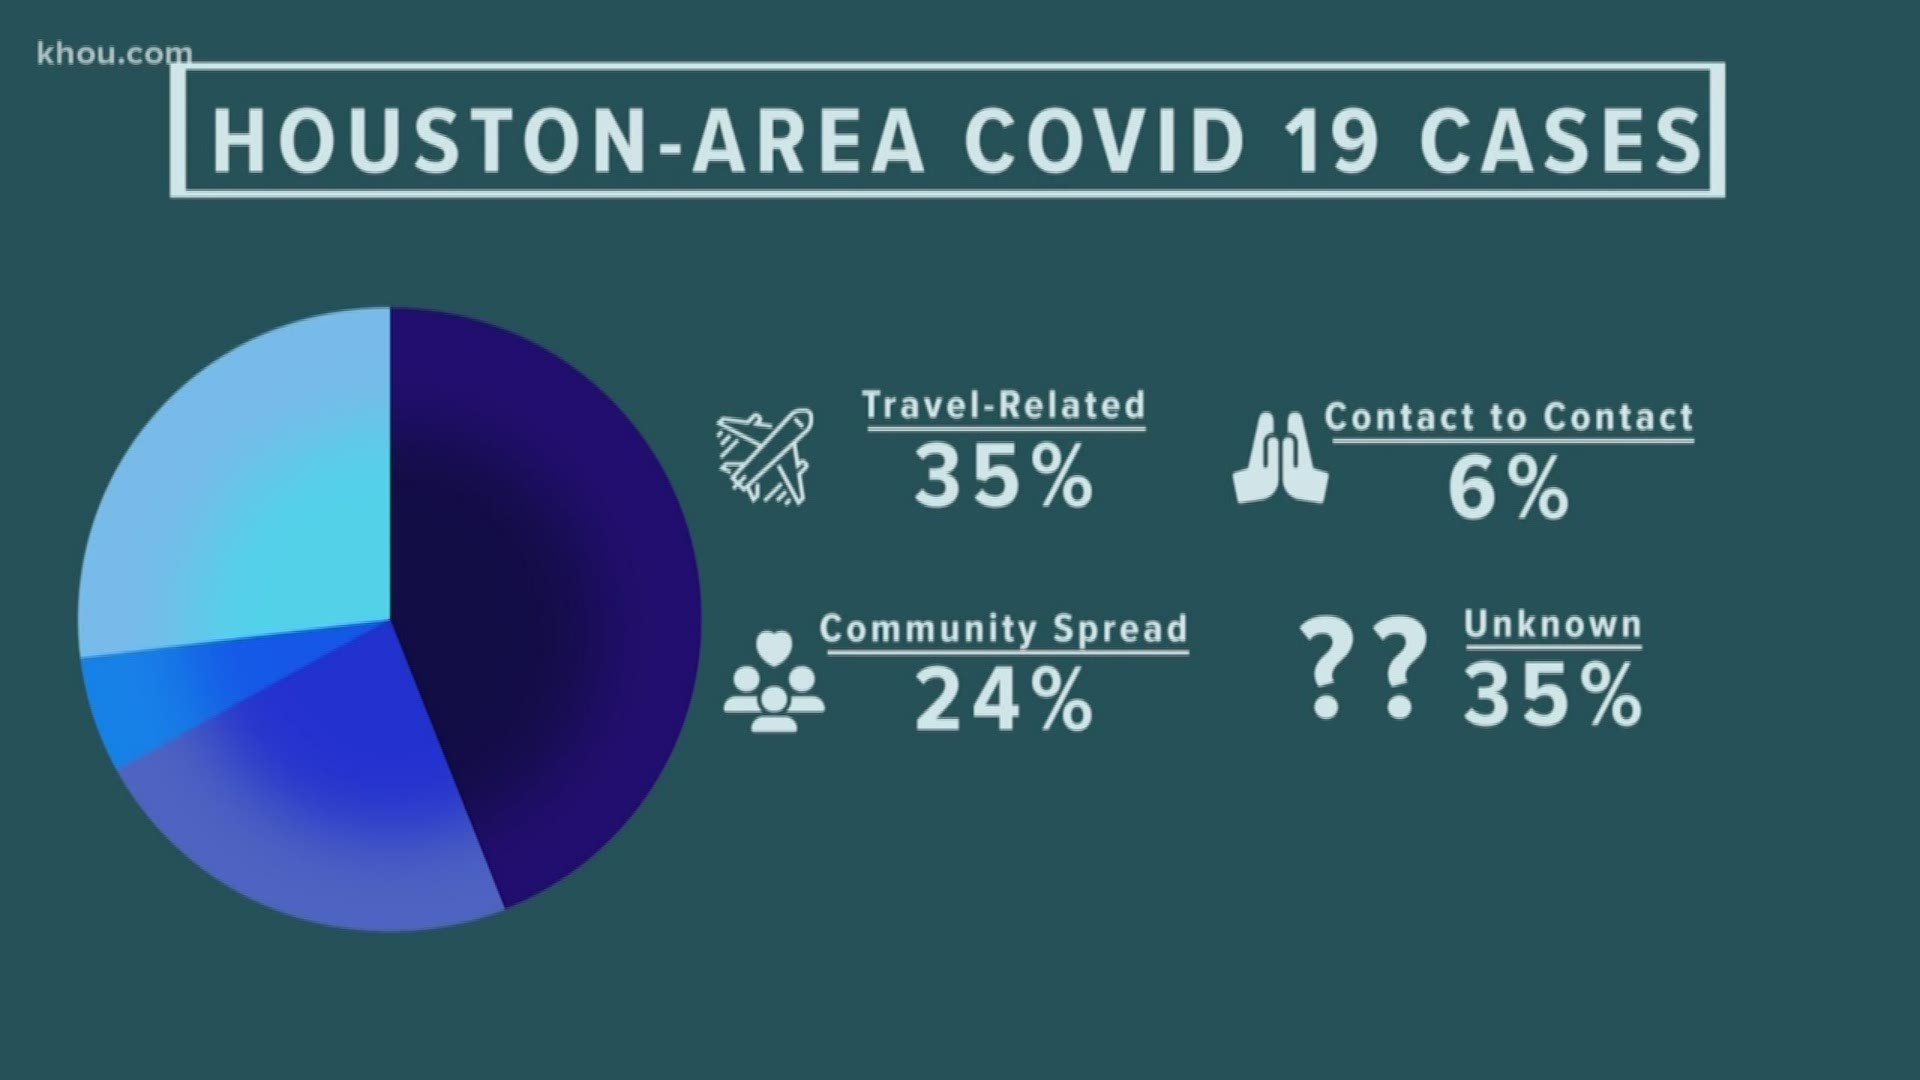 There have been more than 250 positive cases in the greater Houston area.